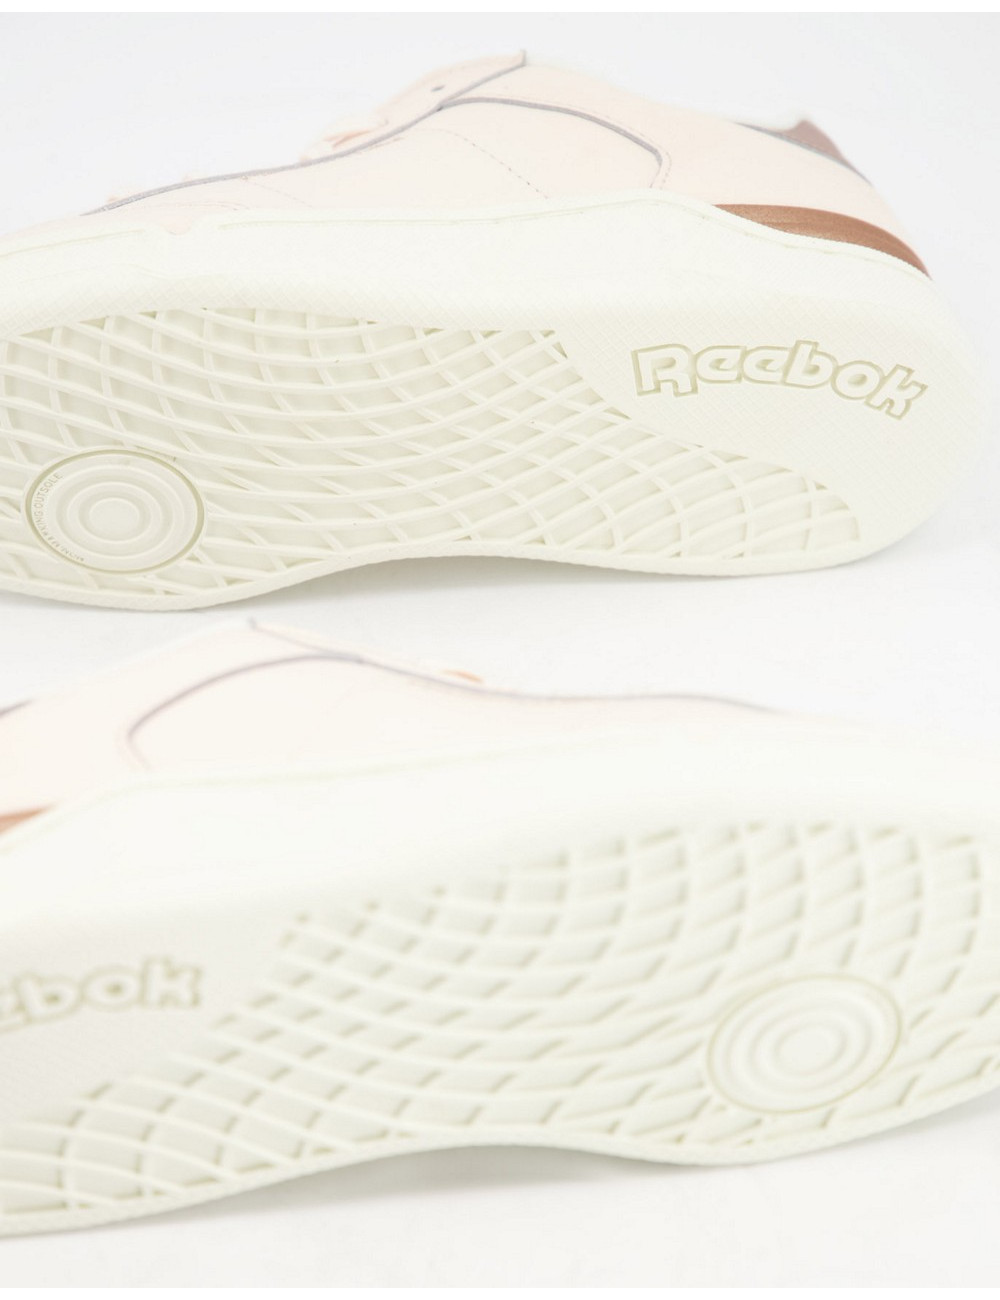 Reebok AD Court trainers in...